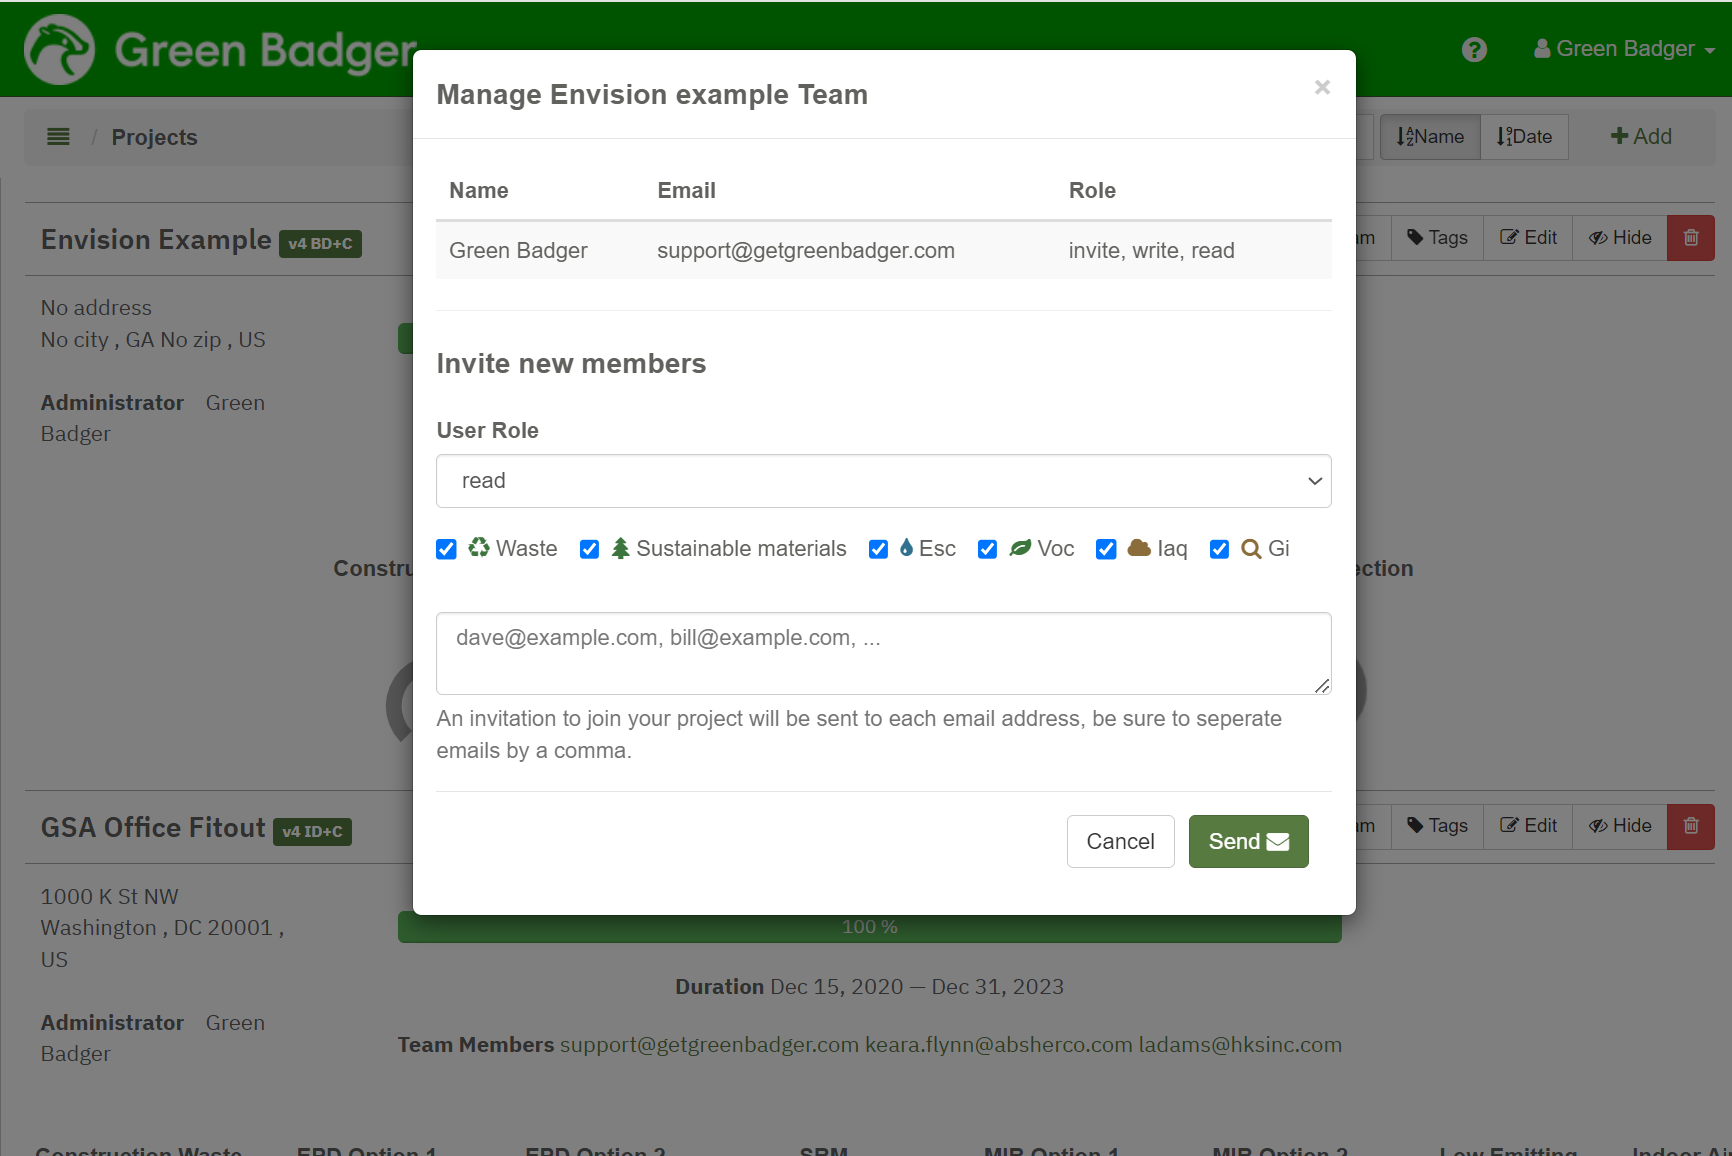 Manage your project teams in Green Badger